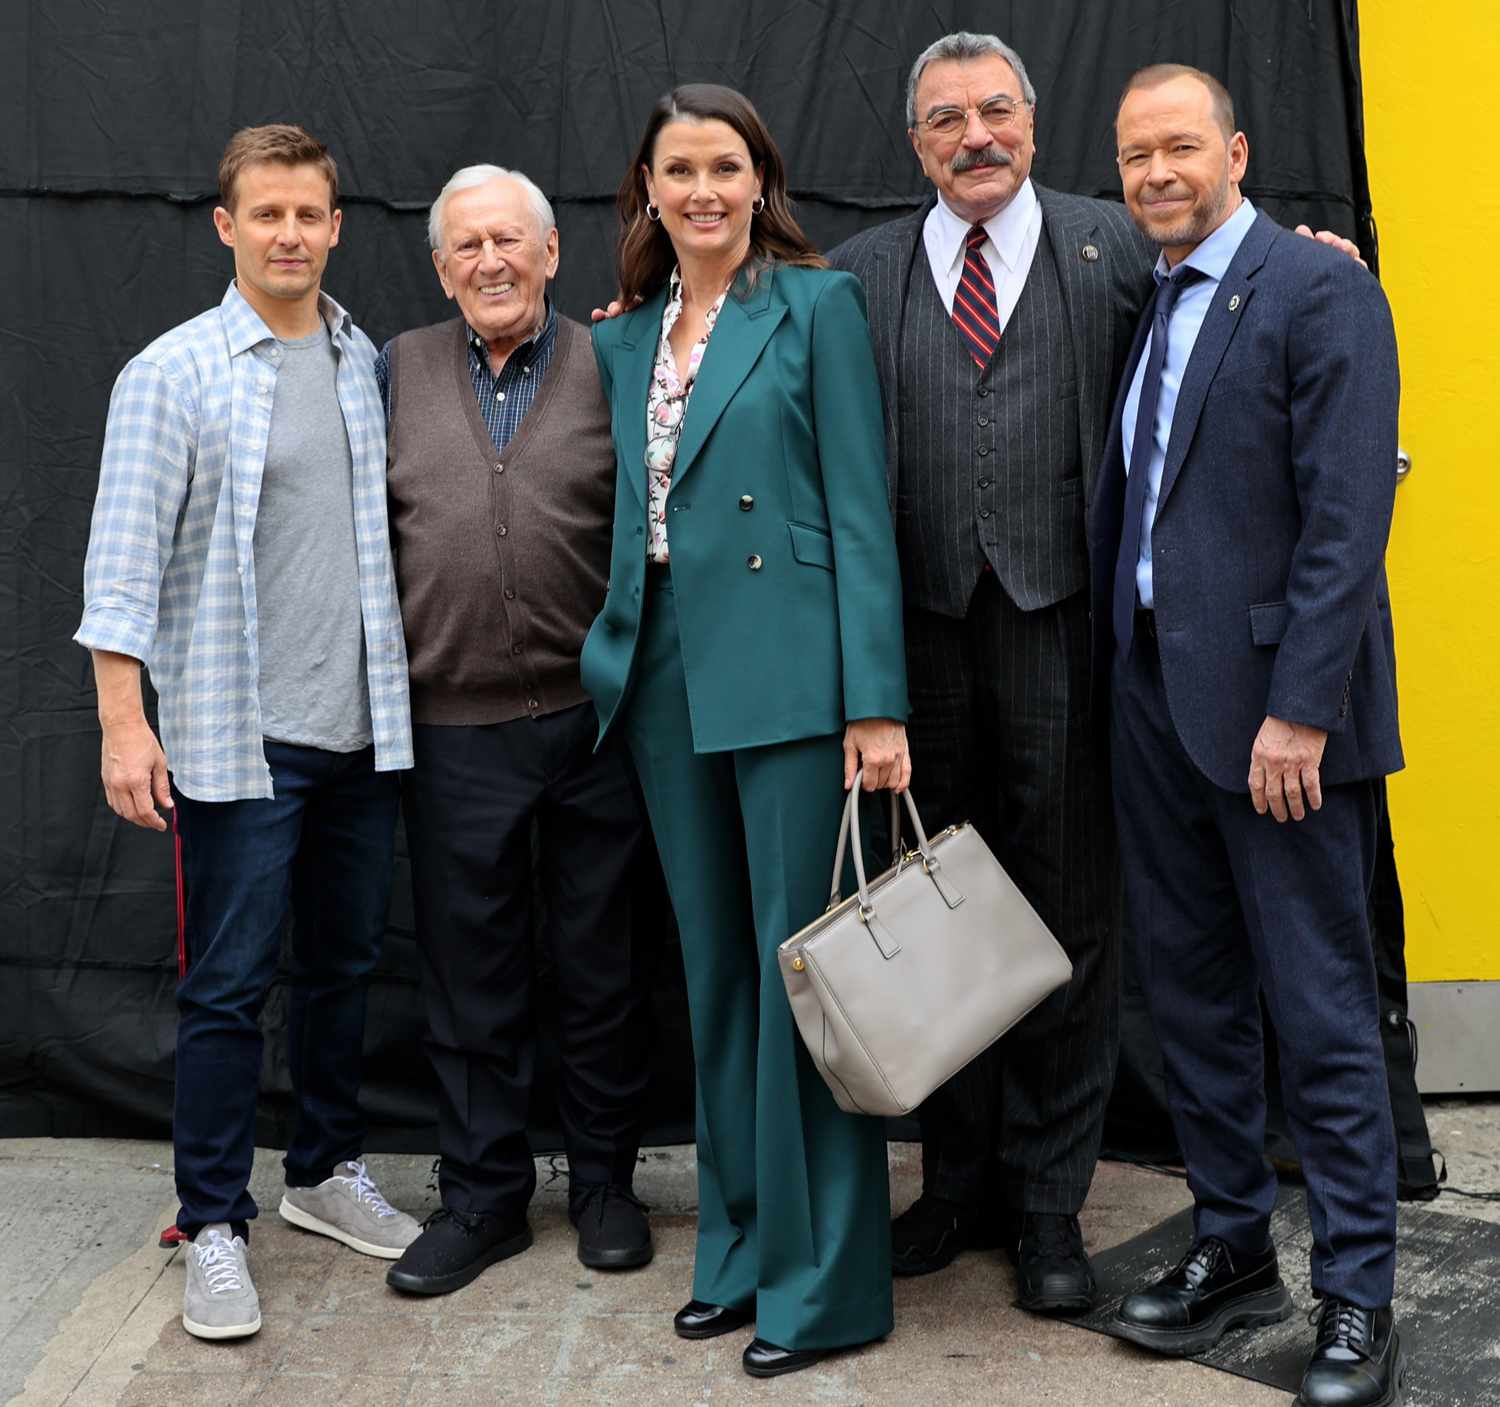 Will Estes, Len Cariou, Bridget Moynahan, Tom Selleck and Donnie Wahlberg are seen on the set of "Blue Bloods" in Greenpoint, Brooklyn on May 01, 2024 in New York City.